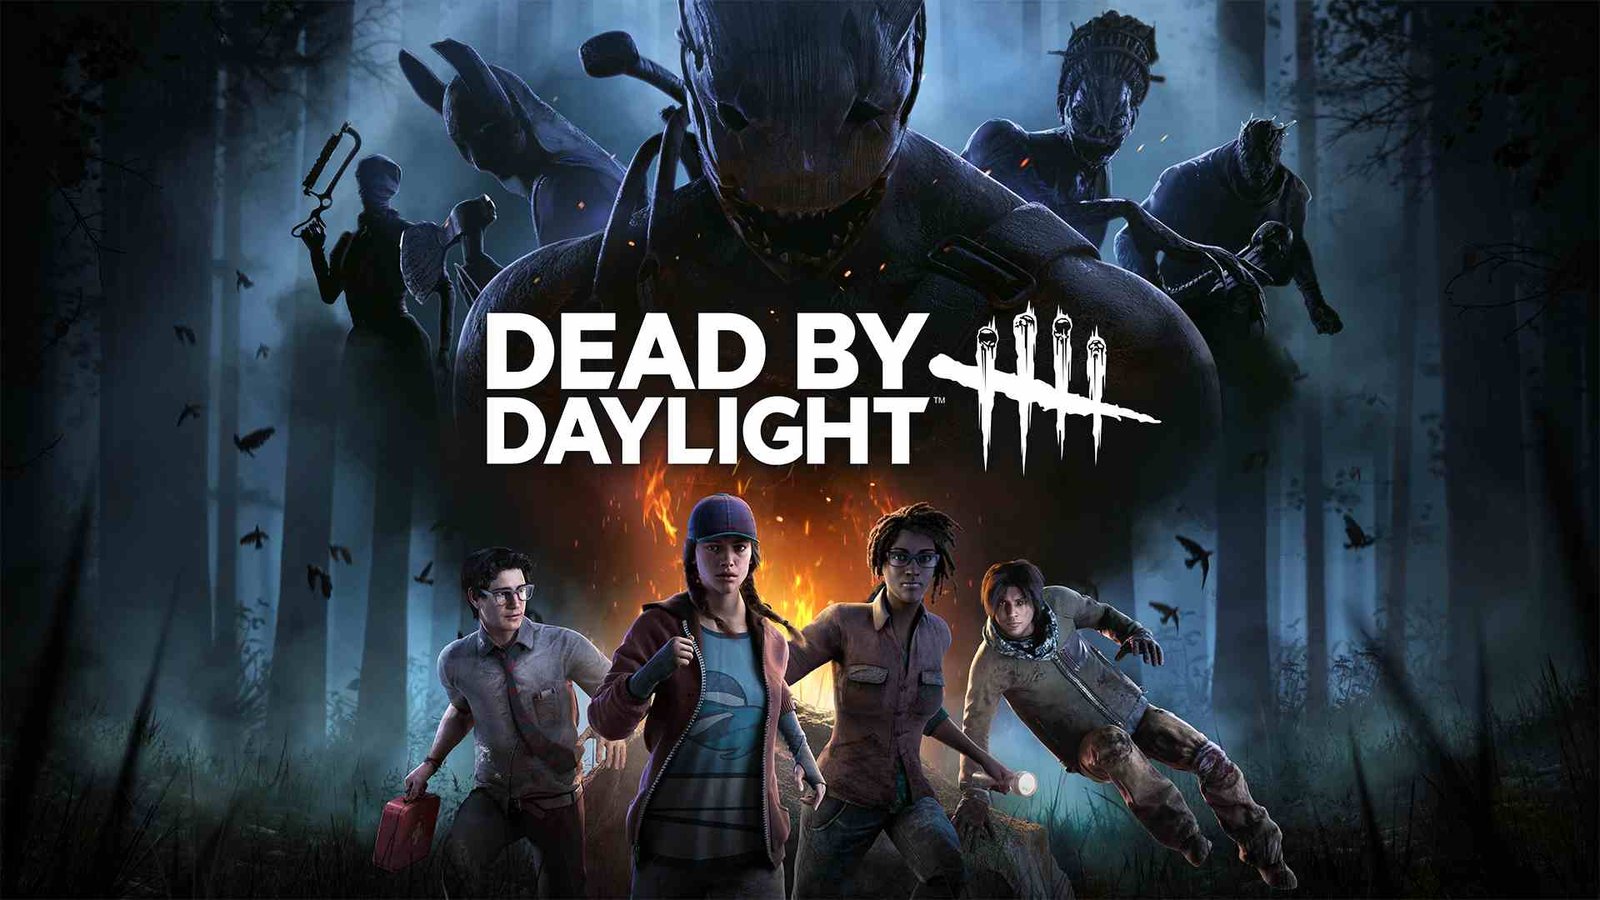 Dead by Daylight (DBD) DLC list in order with prices